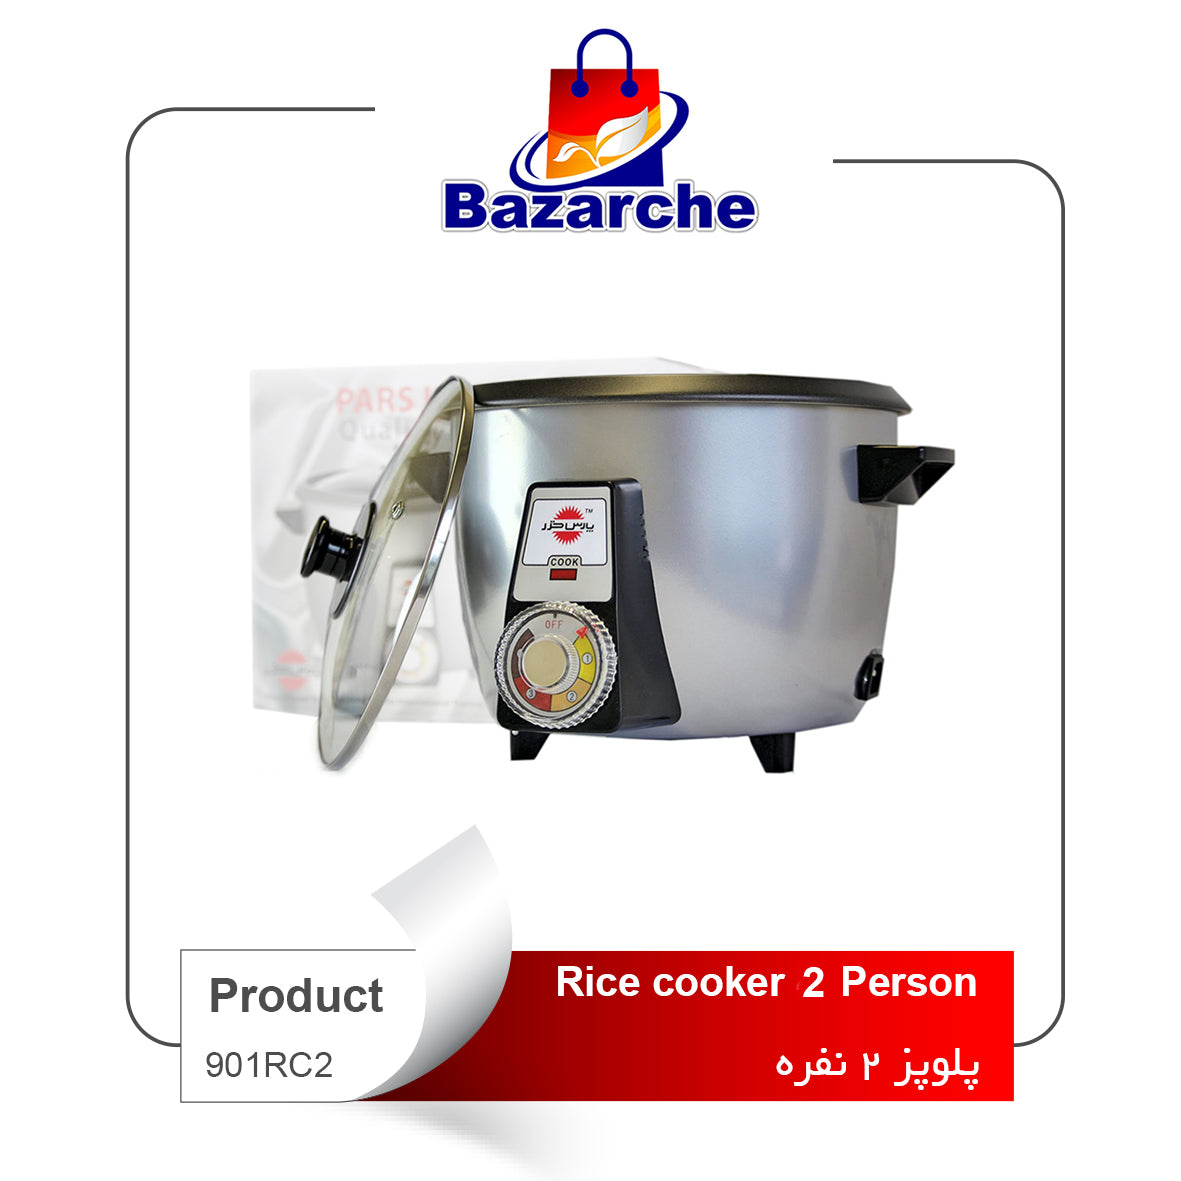 Rice cooker 2 Person (پلوپز ۲ نفره)